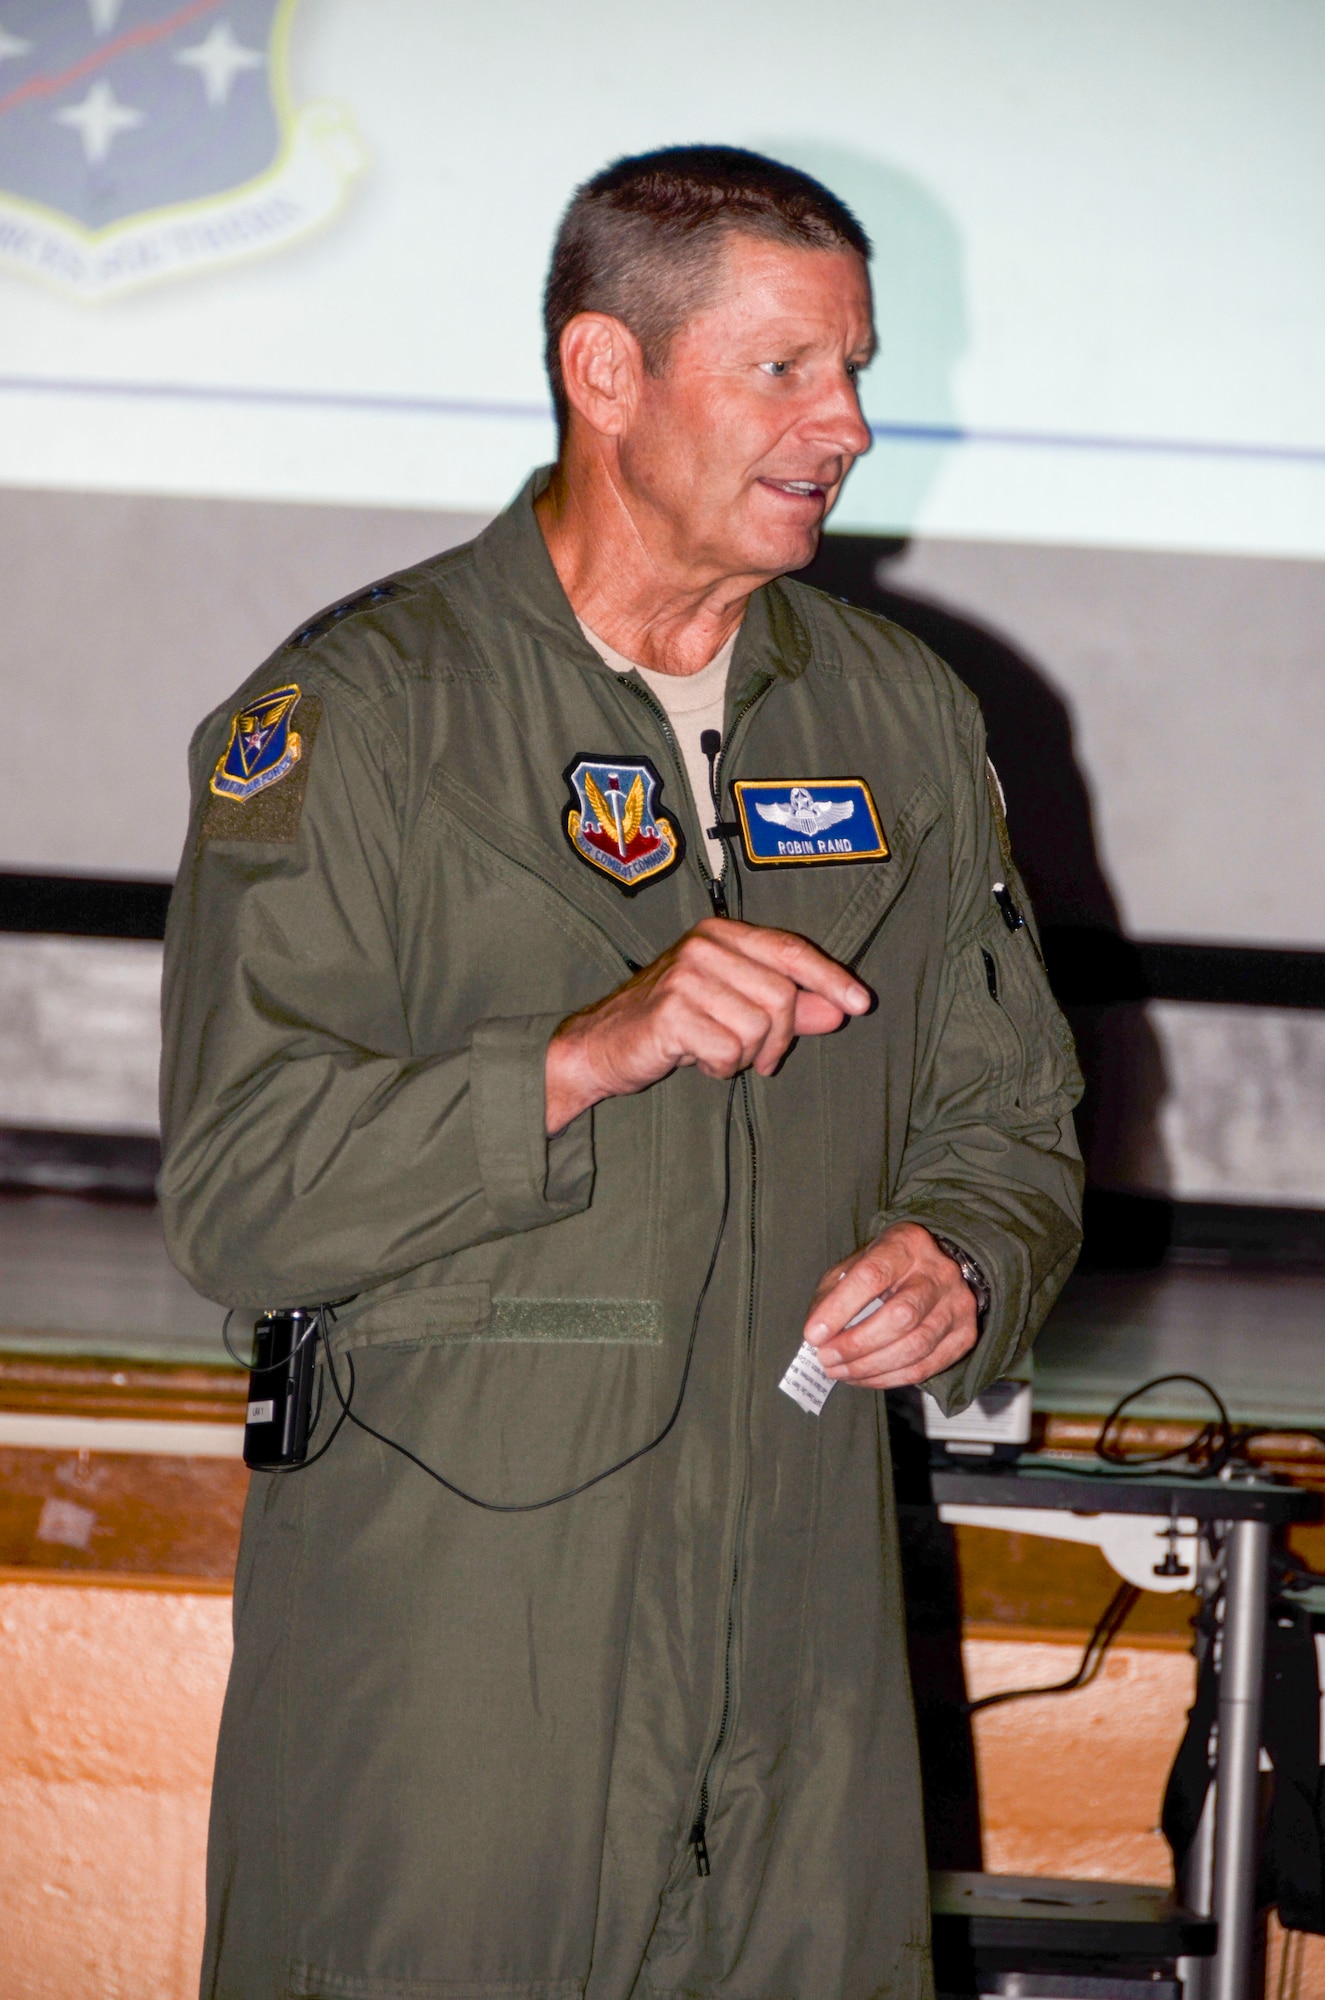 Lt. Gen. Robin Rand, 12th Air Force (Air Forces Southern) commander, speaks with members of 12th AF (AFSOUTH) during a Sexual Assault Prevention and Response down day at Davis-Monthan Air Force Base, Ariz., Sept. 5, 2013. The purpose of the down day was to take a pause in the day-to-day mission to reiterate zero tolerance of sexual assault and focus on fostering a climate of dignity and respect in the Air Force. Military leaders from every level call on Airmen to not be part of the problem, but part of the solution in the movement toward a new culture that aims to rid sexual assault from the ranks. (U.S. Air Force photo by Staff Sgt. Adam Grant/Released)